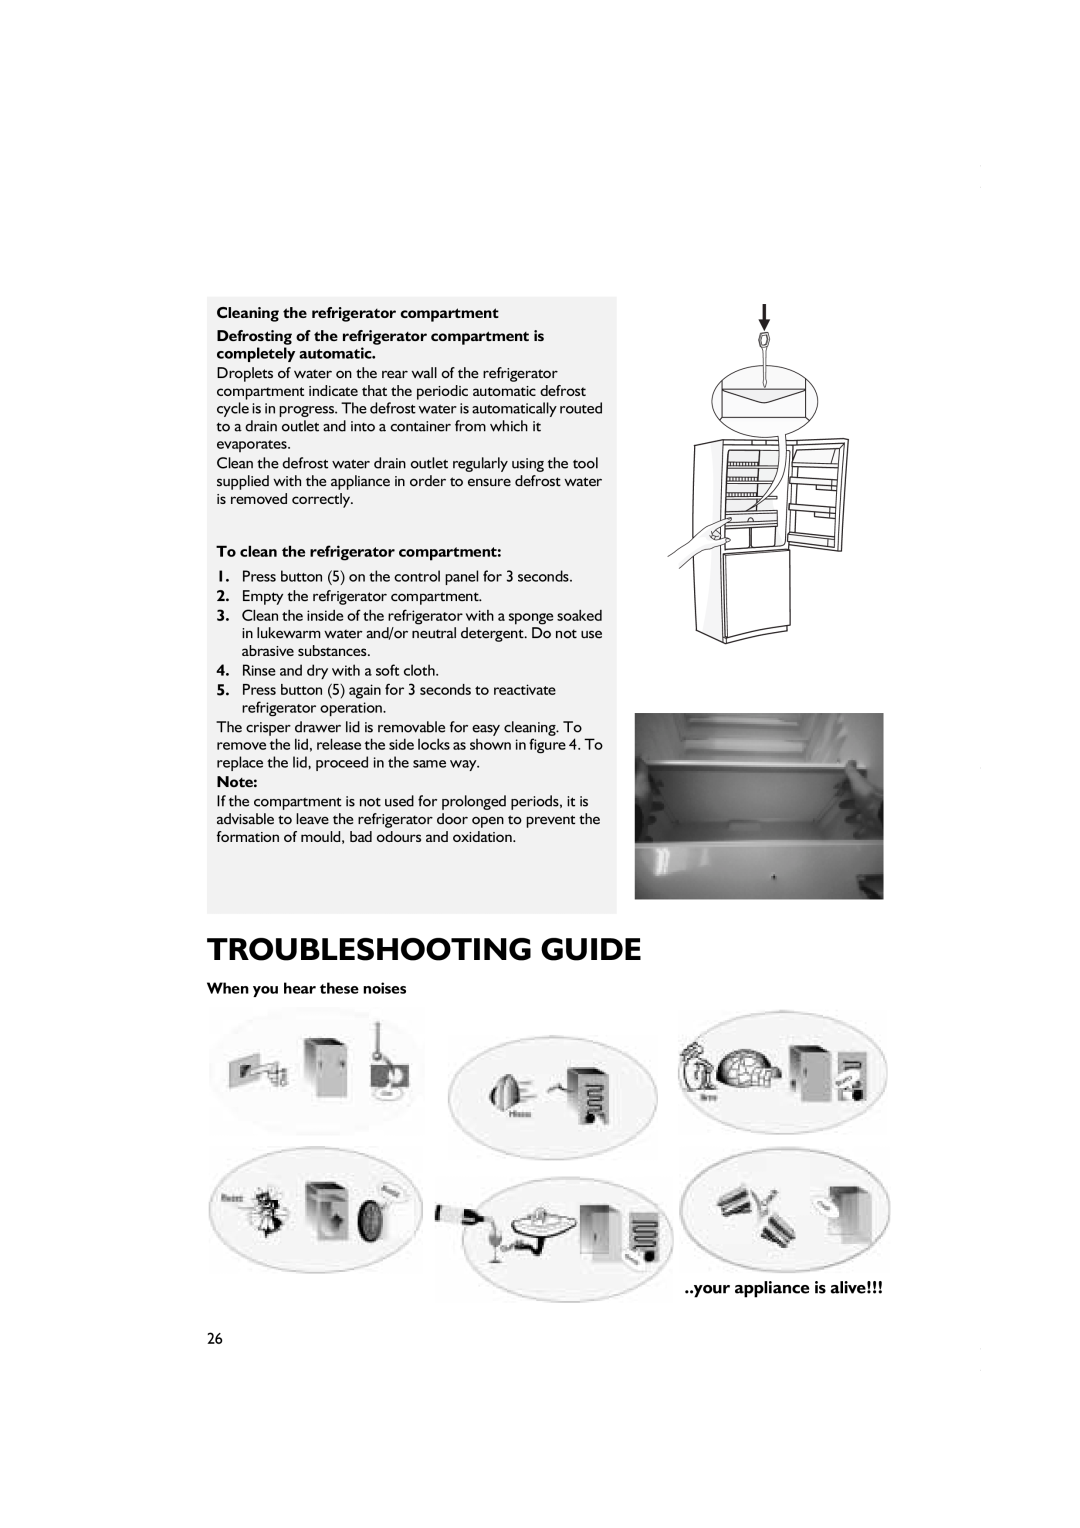 Smeg CR328APZD, CR328AZD7 manual Troubleshooting Guide, your appliance is alive, Cleaning the refrigerator compartment 